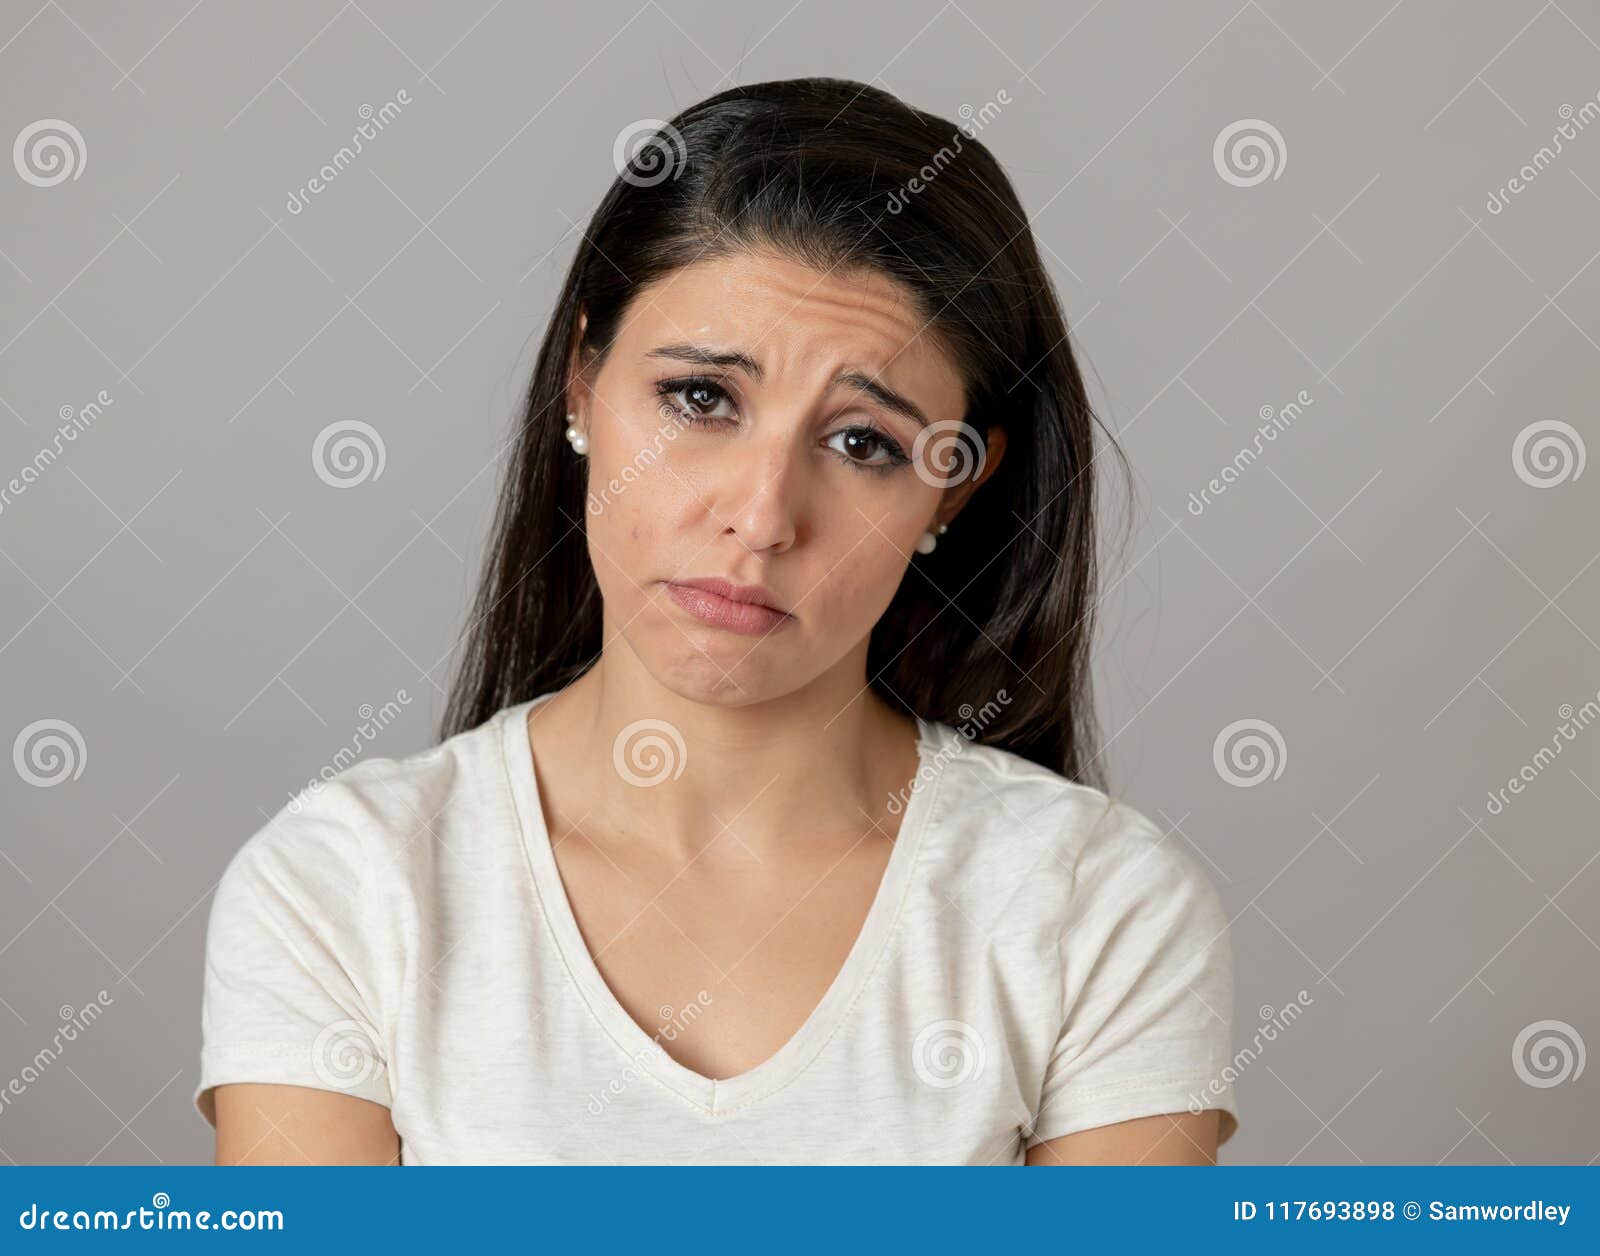 human expressions, emotions. young attractive woman with a sad face, looking depressed and unhappy